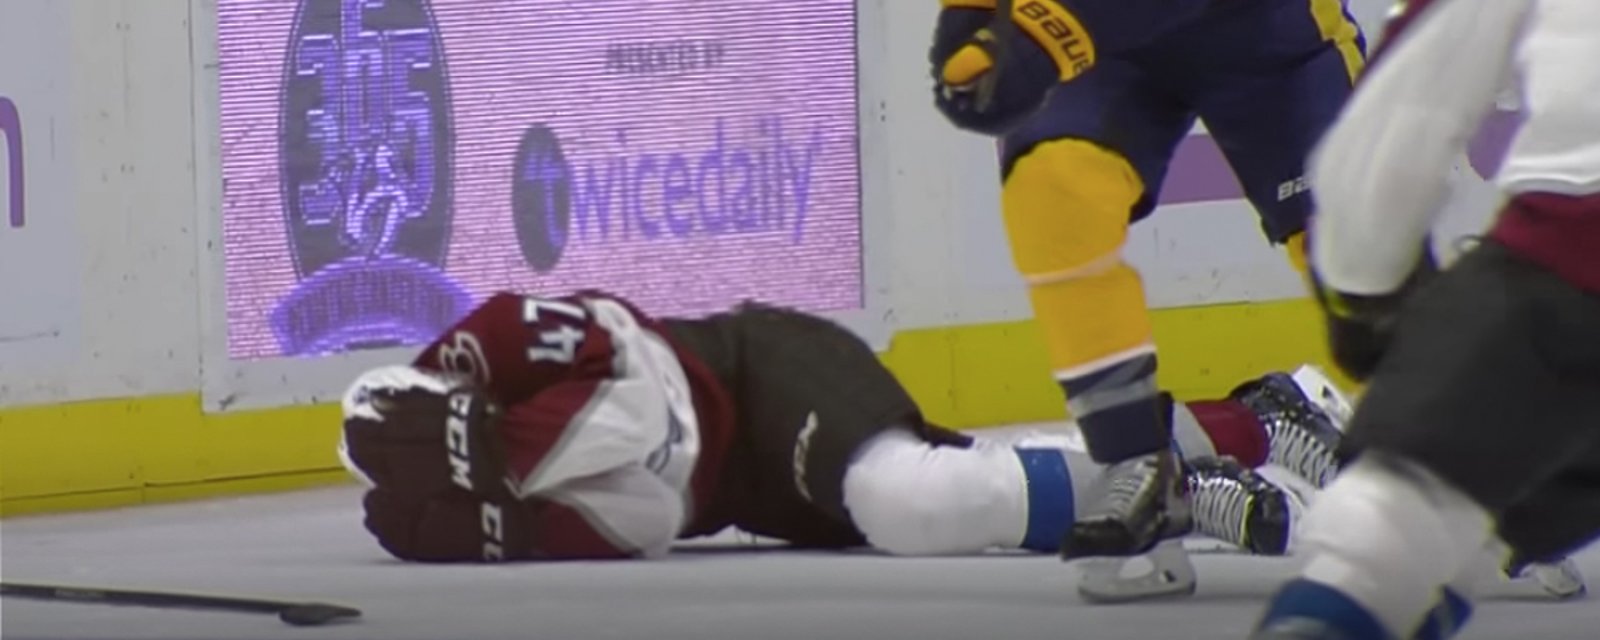 Breaking: Preds forward facing suspension after game misconduct for vicious headshot